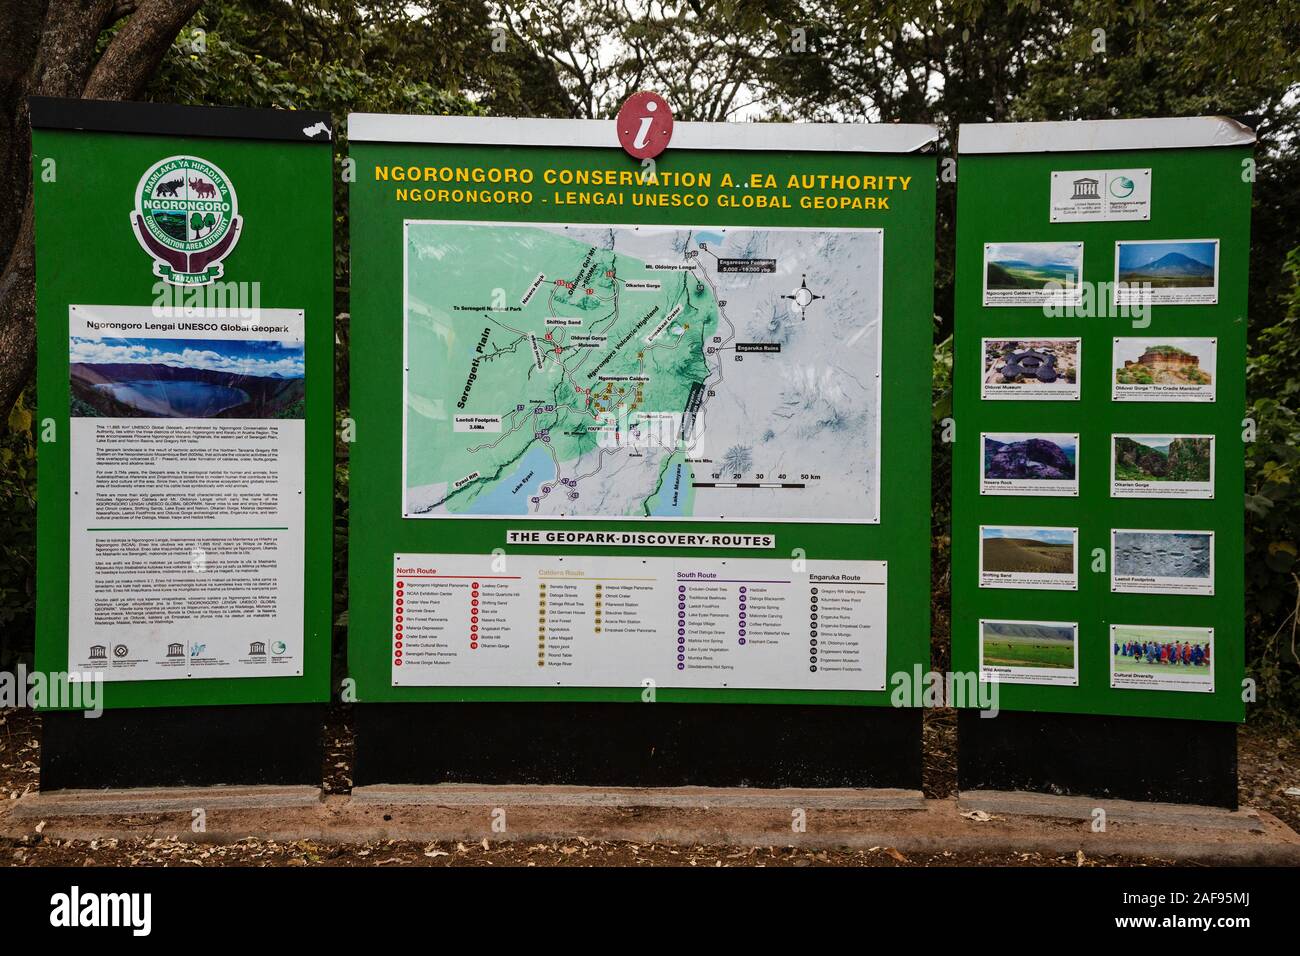 Tanzania. Ngorongoro Crater, Map of the Conservation Area. Stock Photo